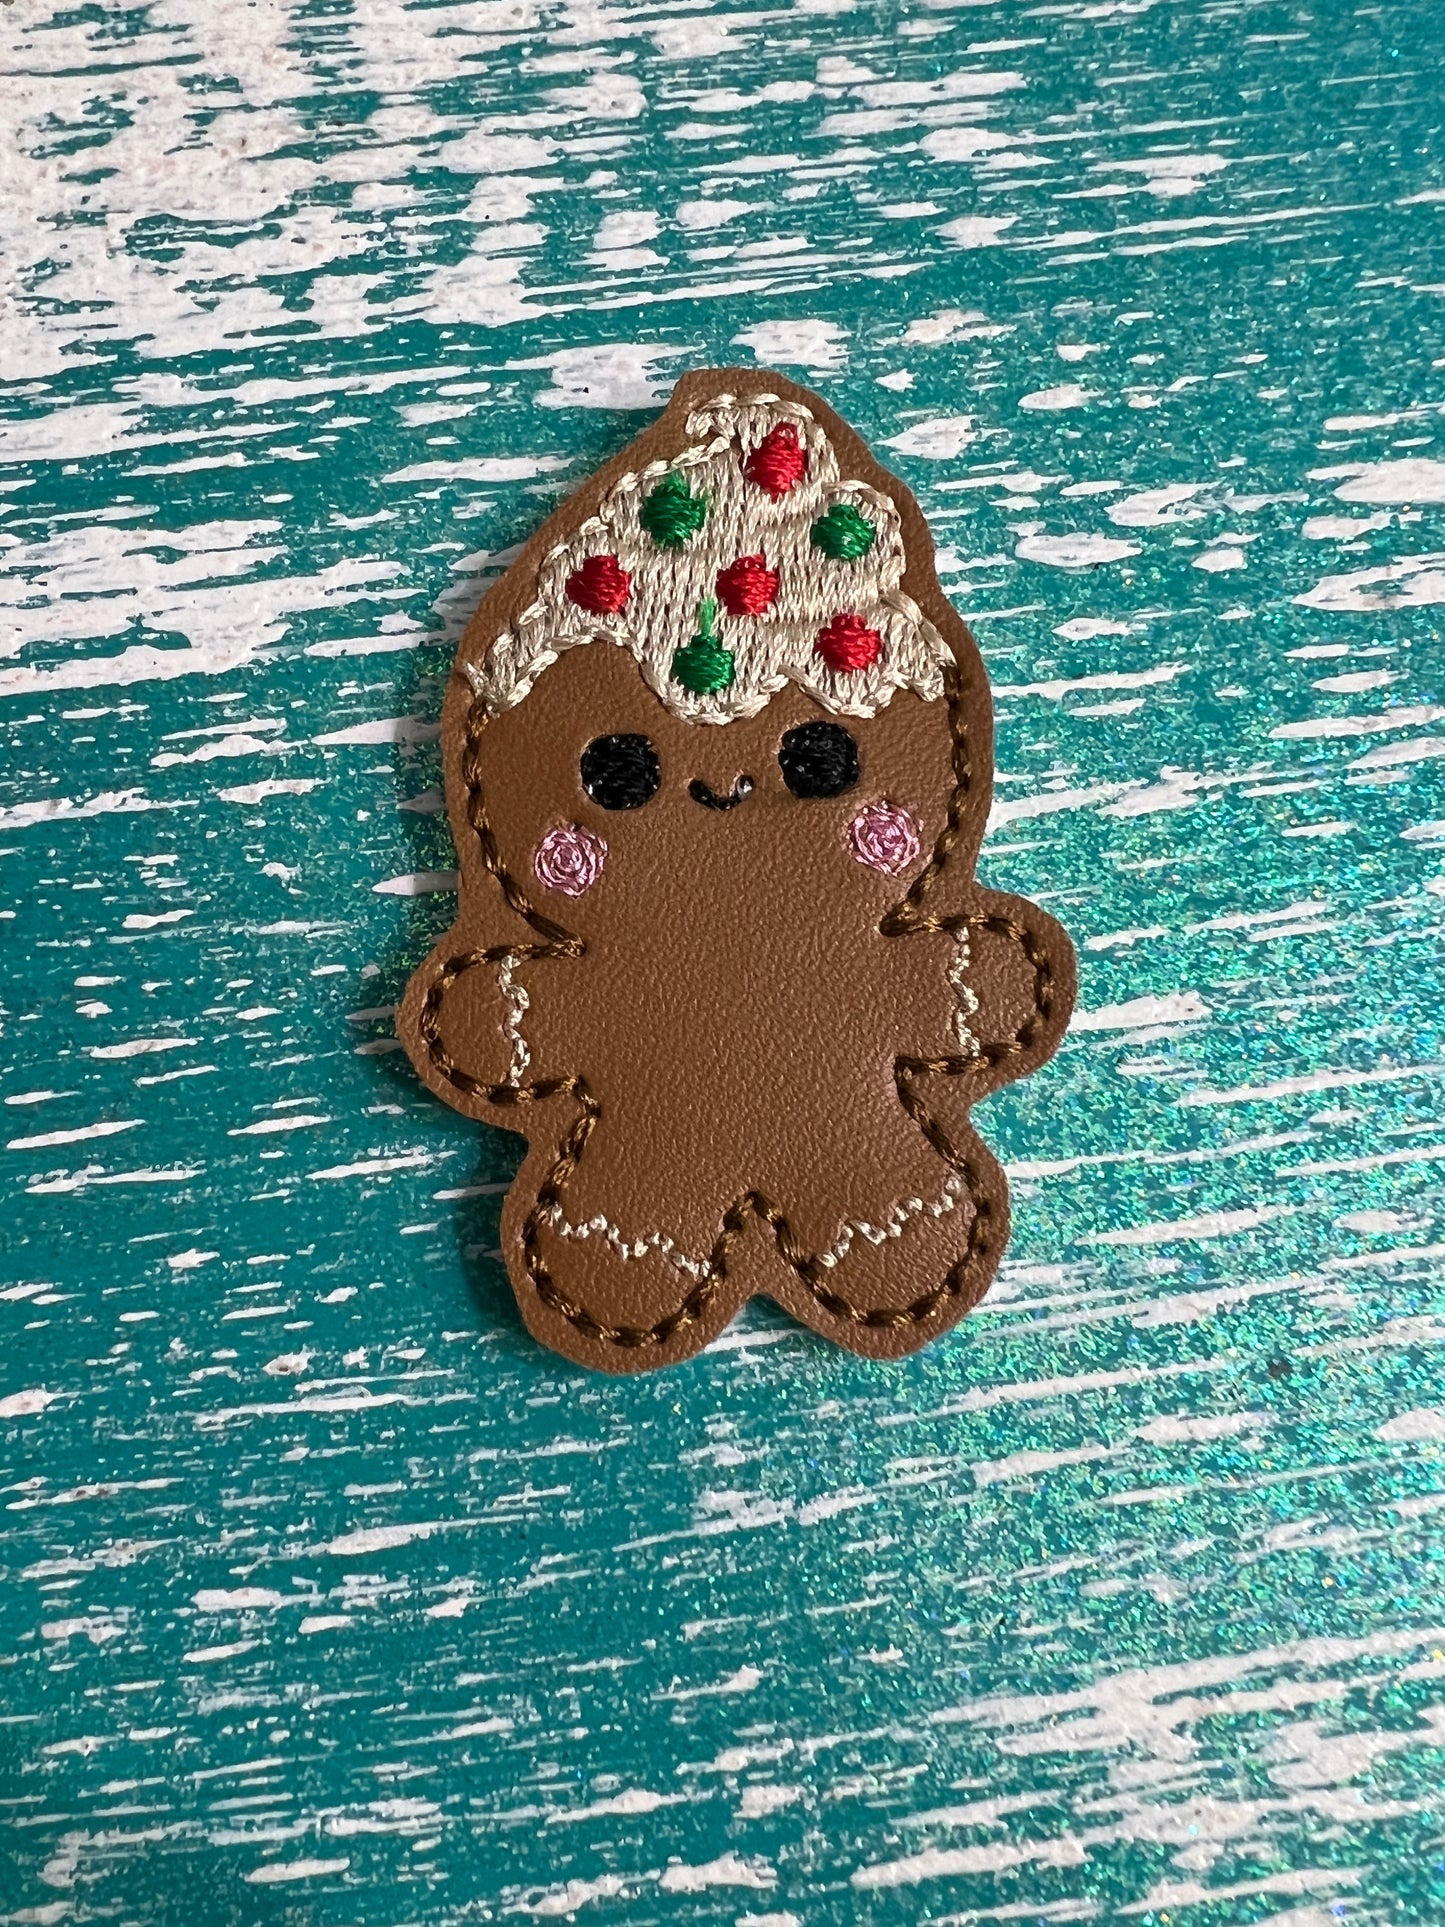 Whipped topped gingerbread man